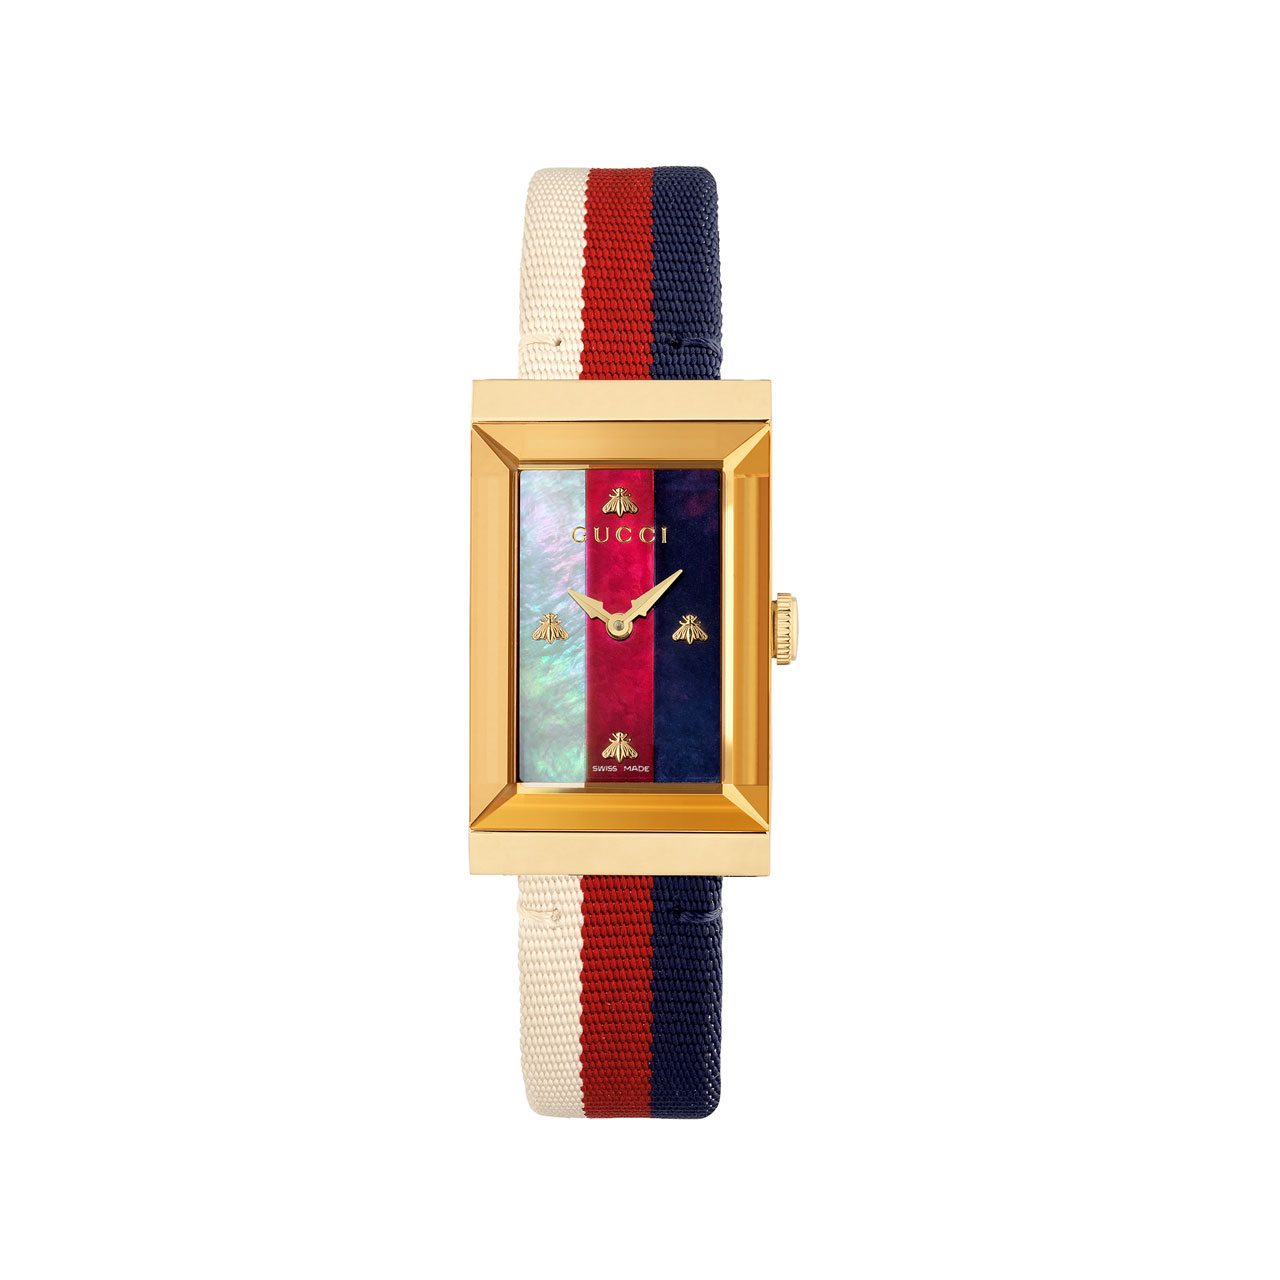 Technical Beauty at Boxfox1: Gucci G-Frame watch collection